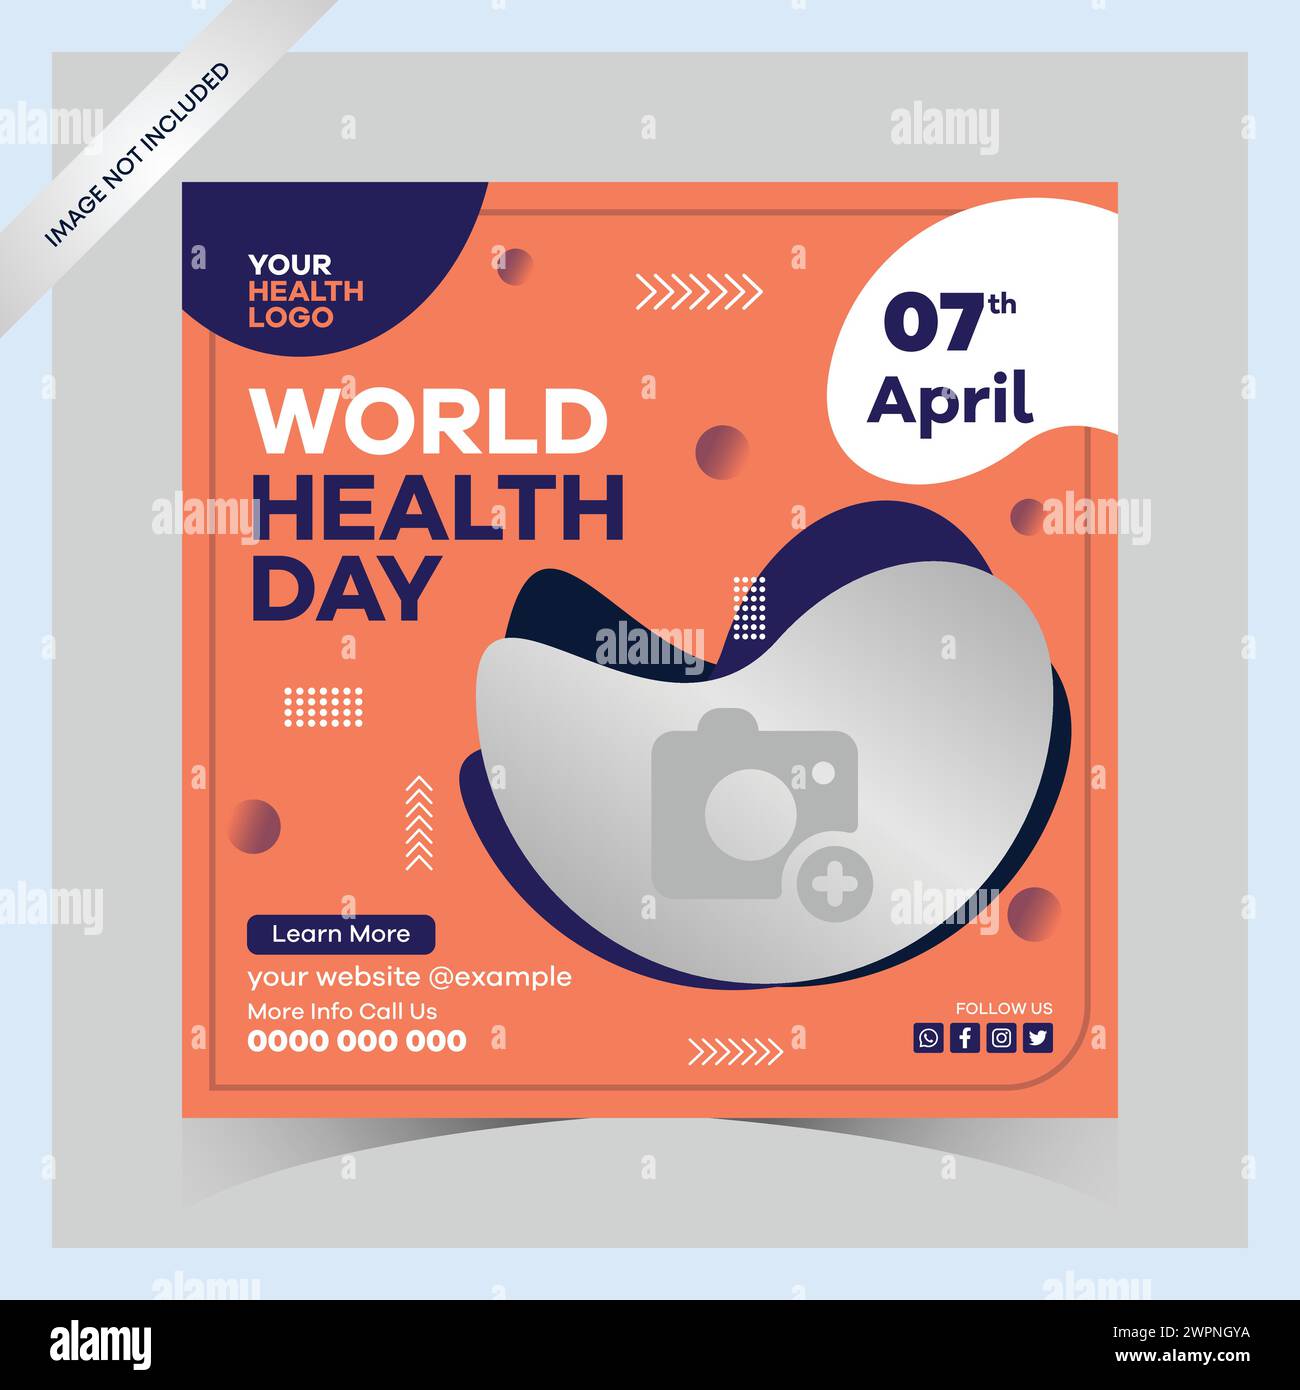 World health day instagram posts and square social media template   world day, health, heart medical, heart day, medical day, health illustration,  he Stock Vector